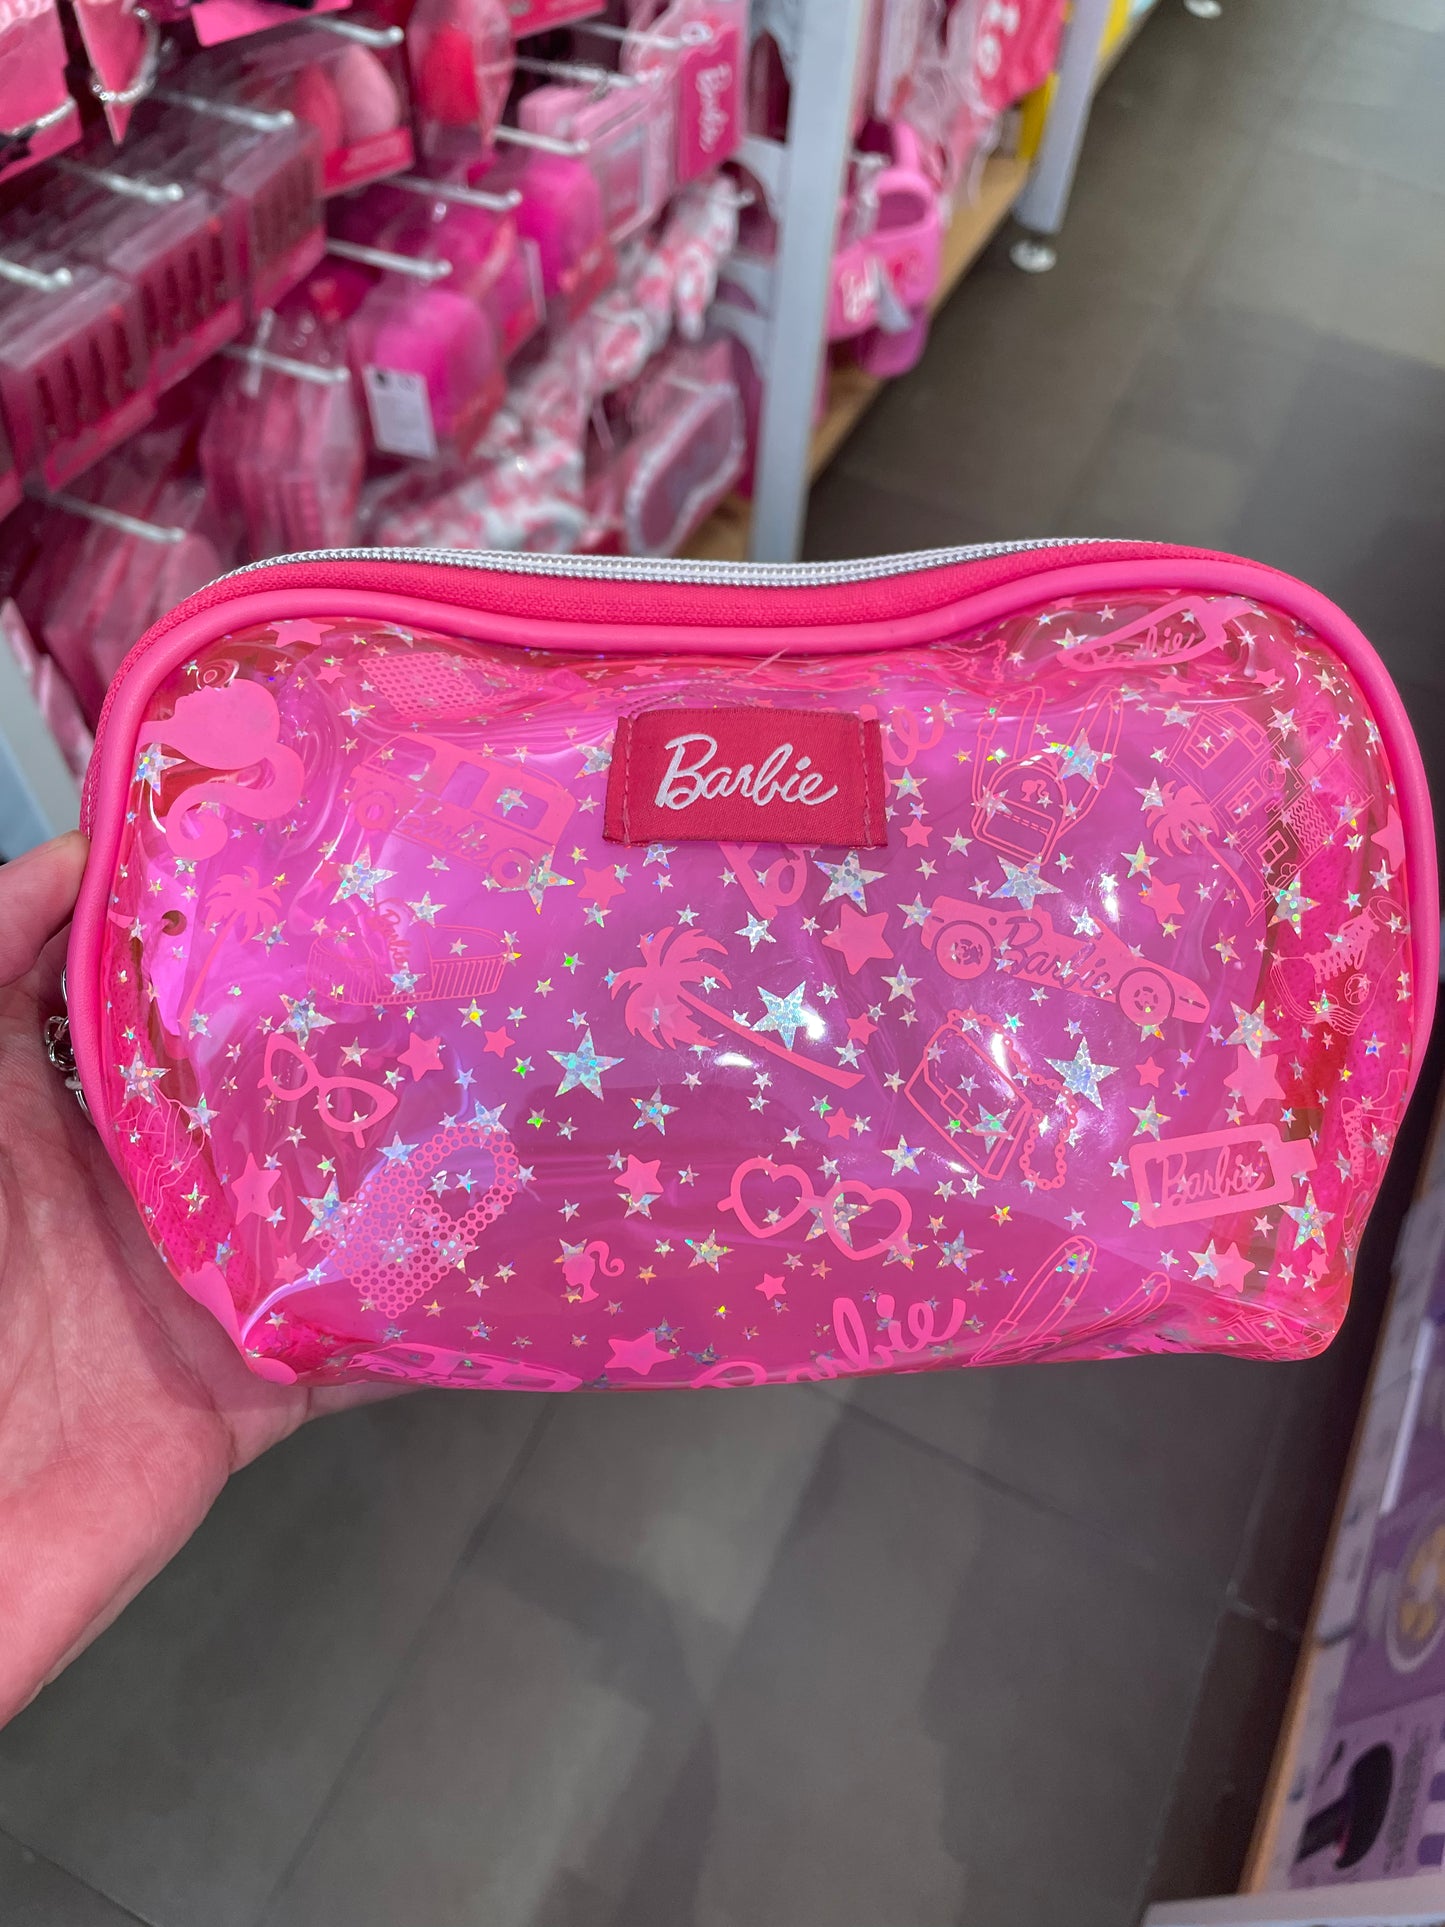 MINISO Barbie Series　Pouch